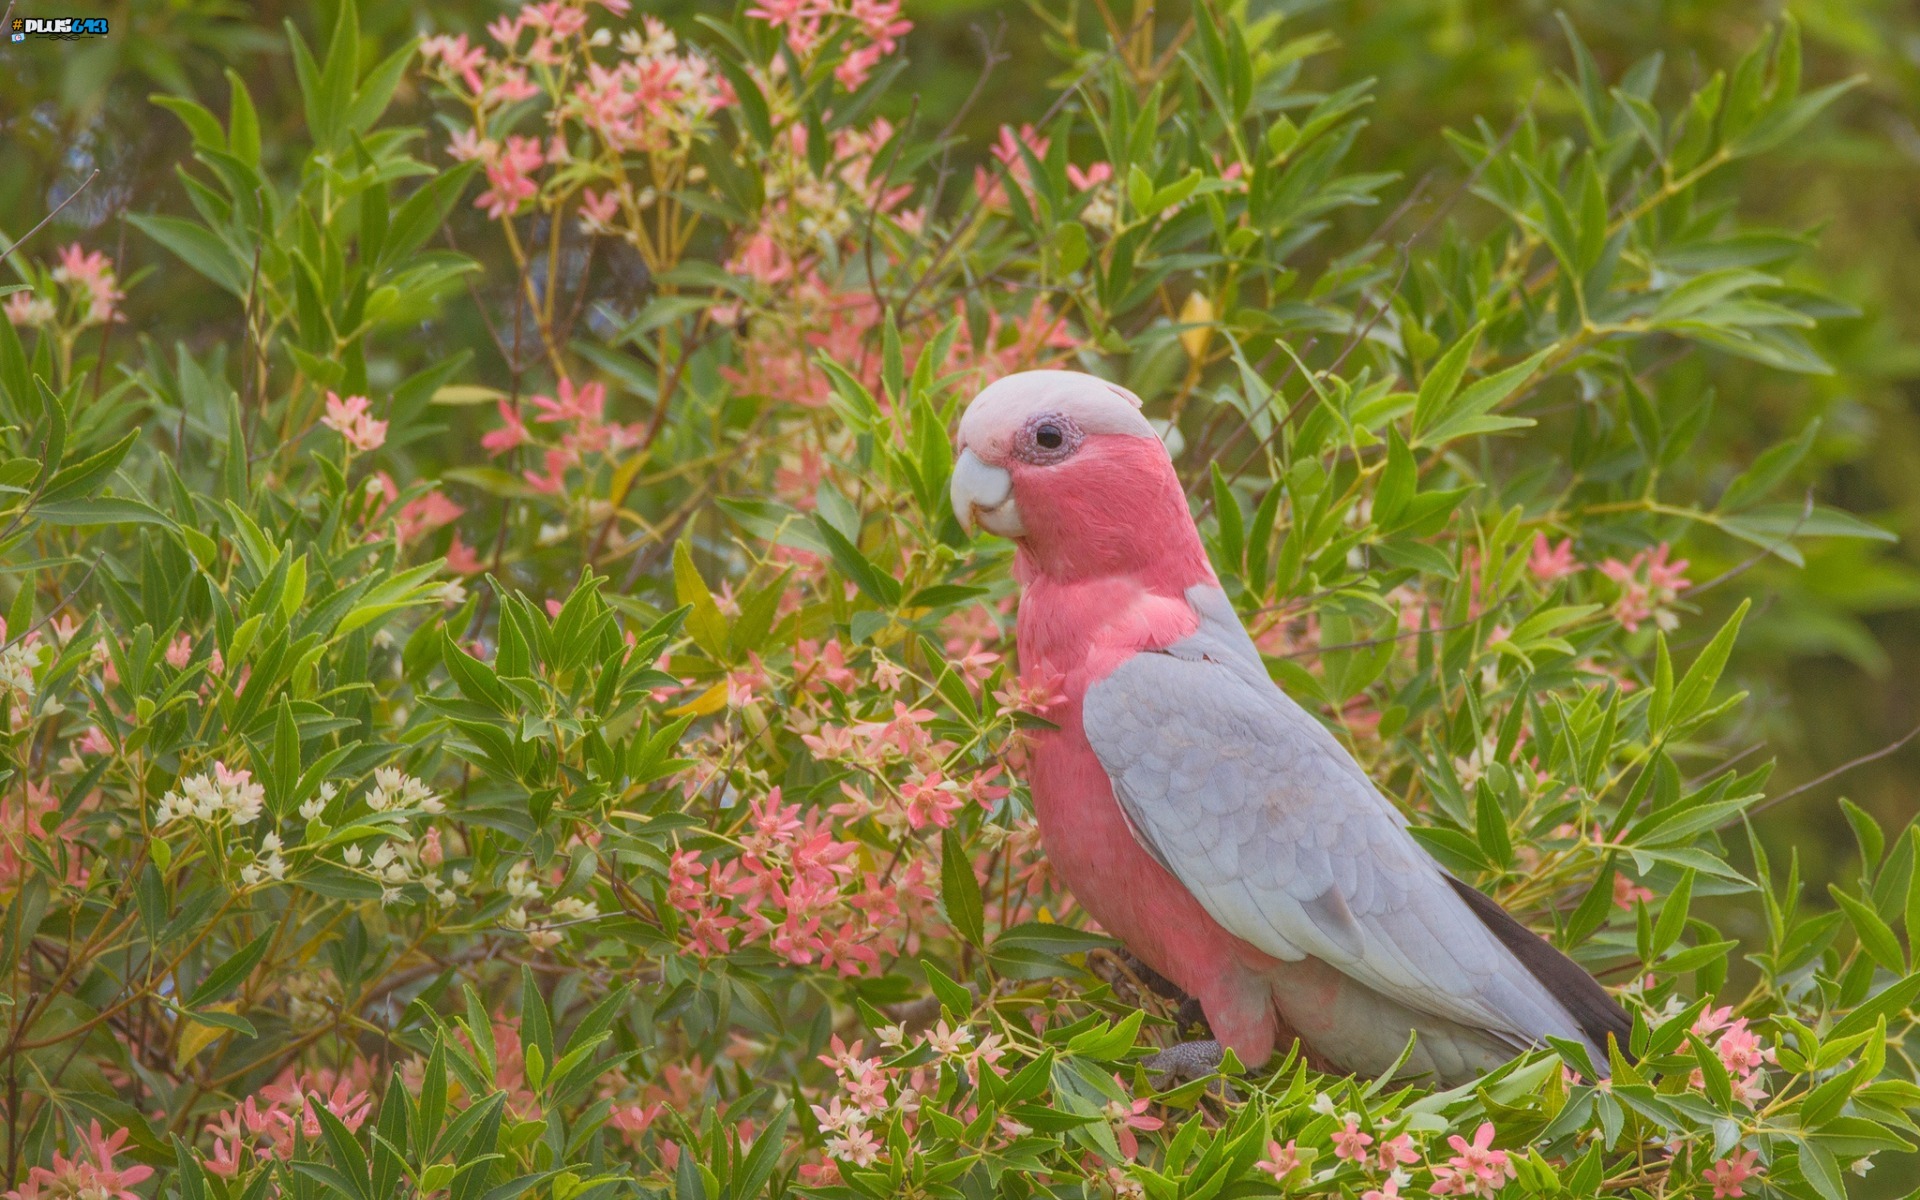 These have to be the dumbest birds on earth.  To be called a galah...